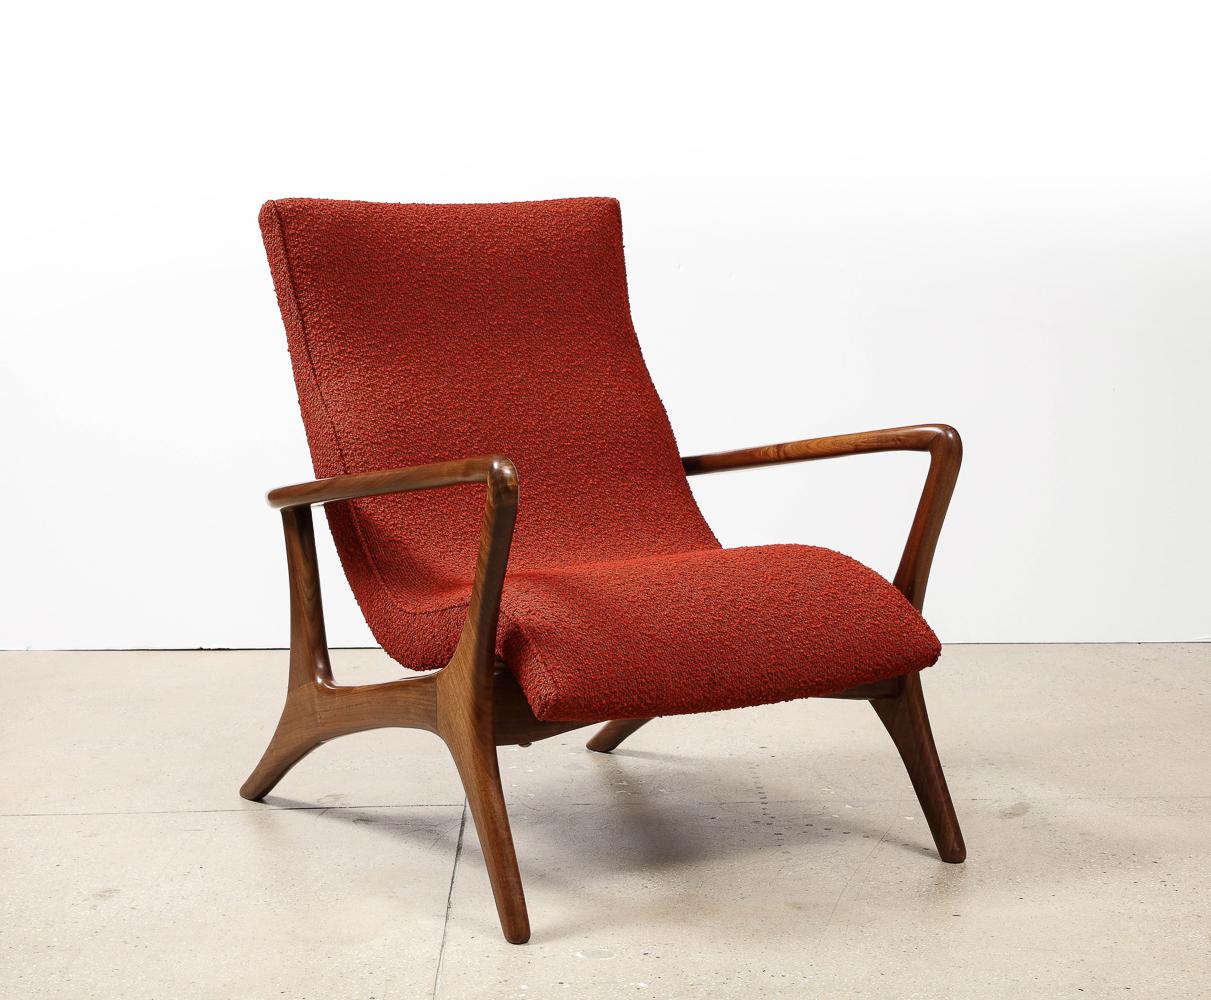 Rare Contour Lounge Chair by Vladimir Kagan. Walnut, upholstery. A classic Kagan form with sculptural walnut frame. Designed in 1953, this example produced c. 1970.